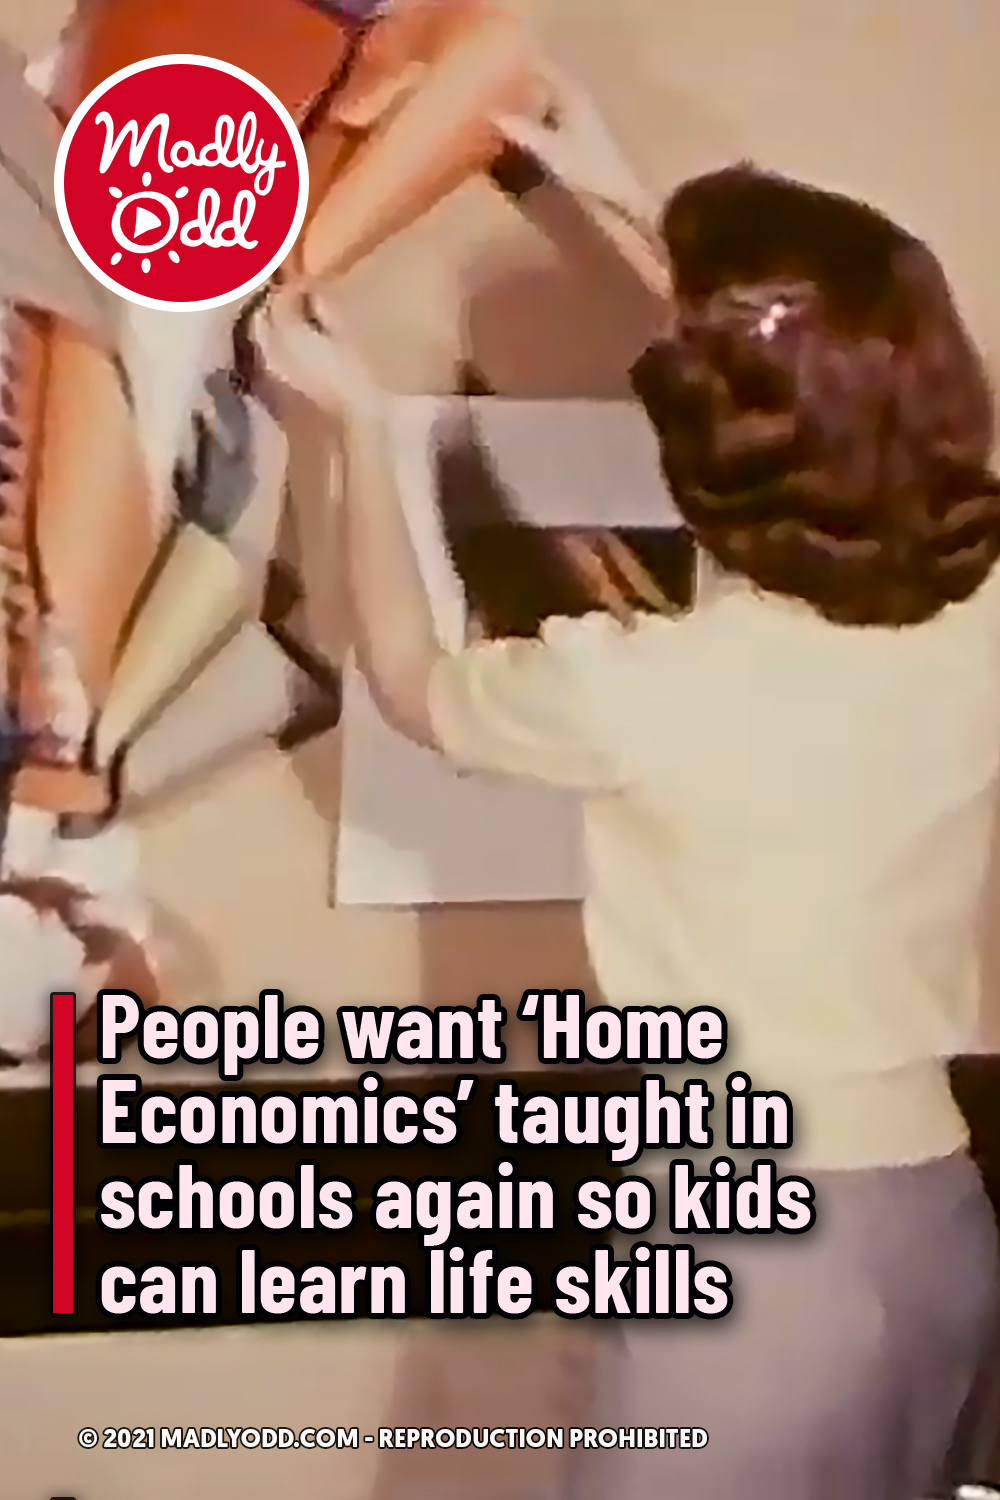 People want ‘Home Economics’ taught in schools again so kids can learn life skills